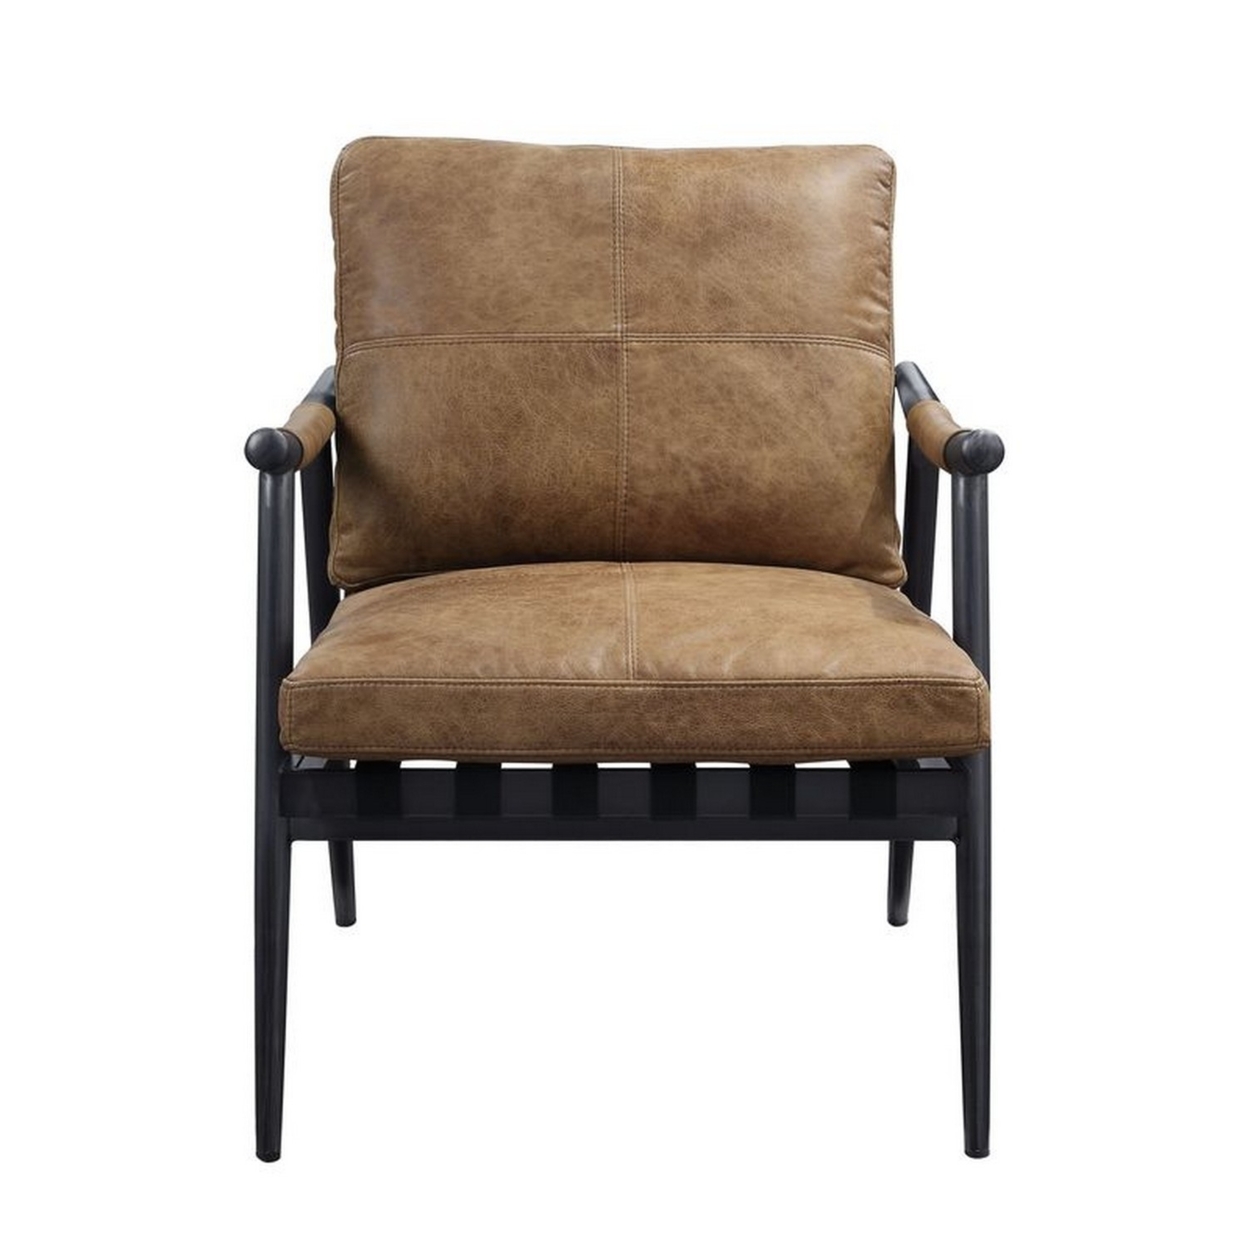 Accent Chair With Leatherette Seat And Tubular Frame, Brown- Saltoro Sherpi